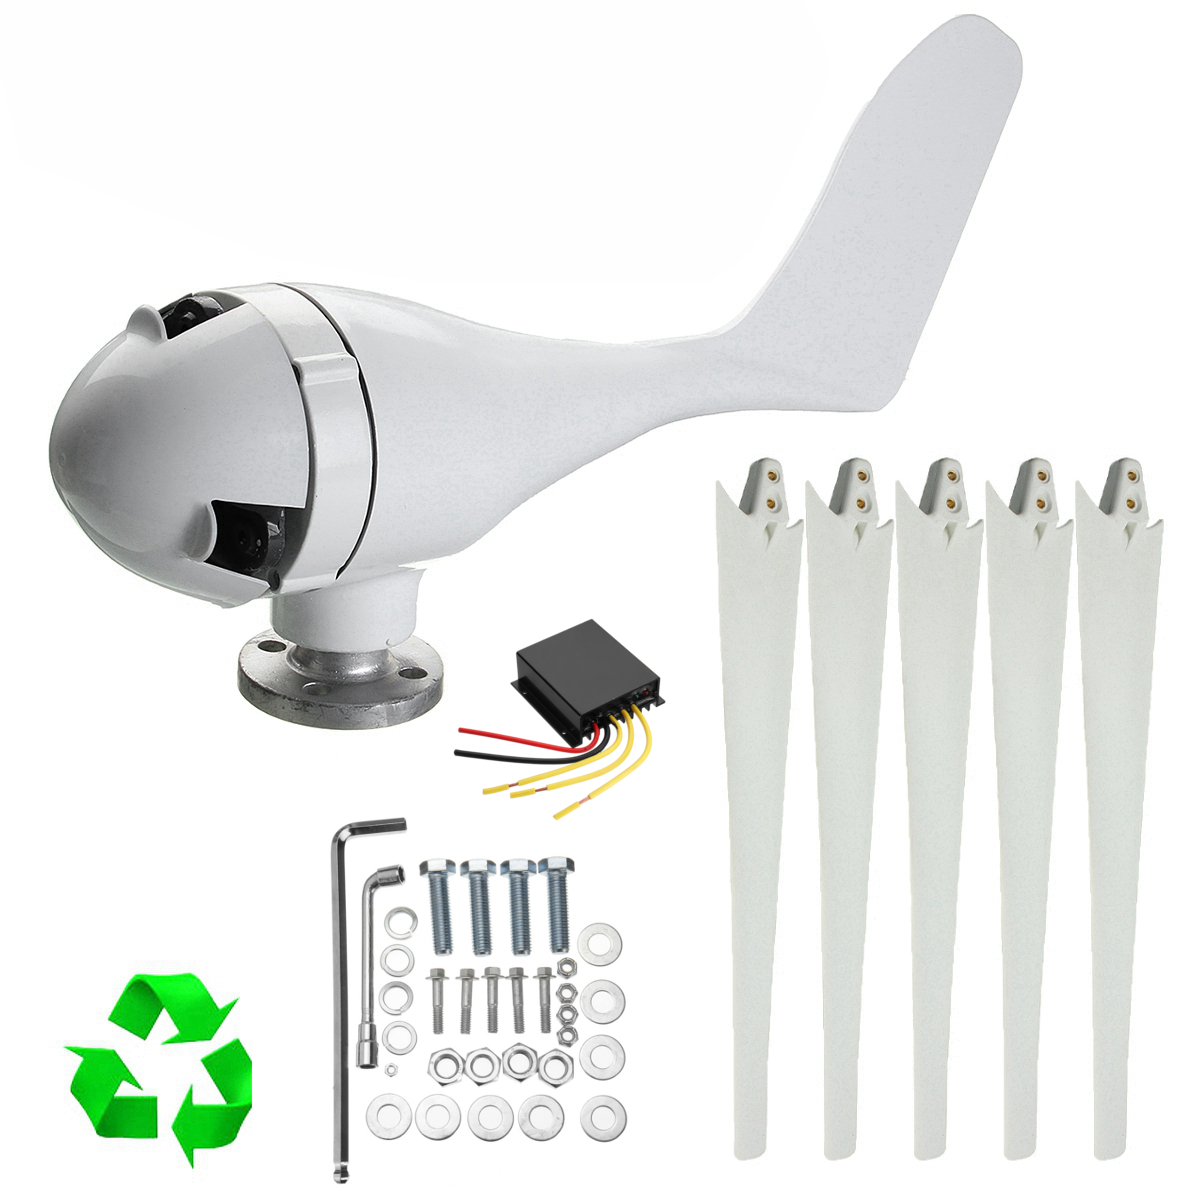 

1000W 12V/24/48V Wind Turbine Generator 3/5 Blades Home Power With Charger Controller